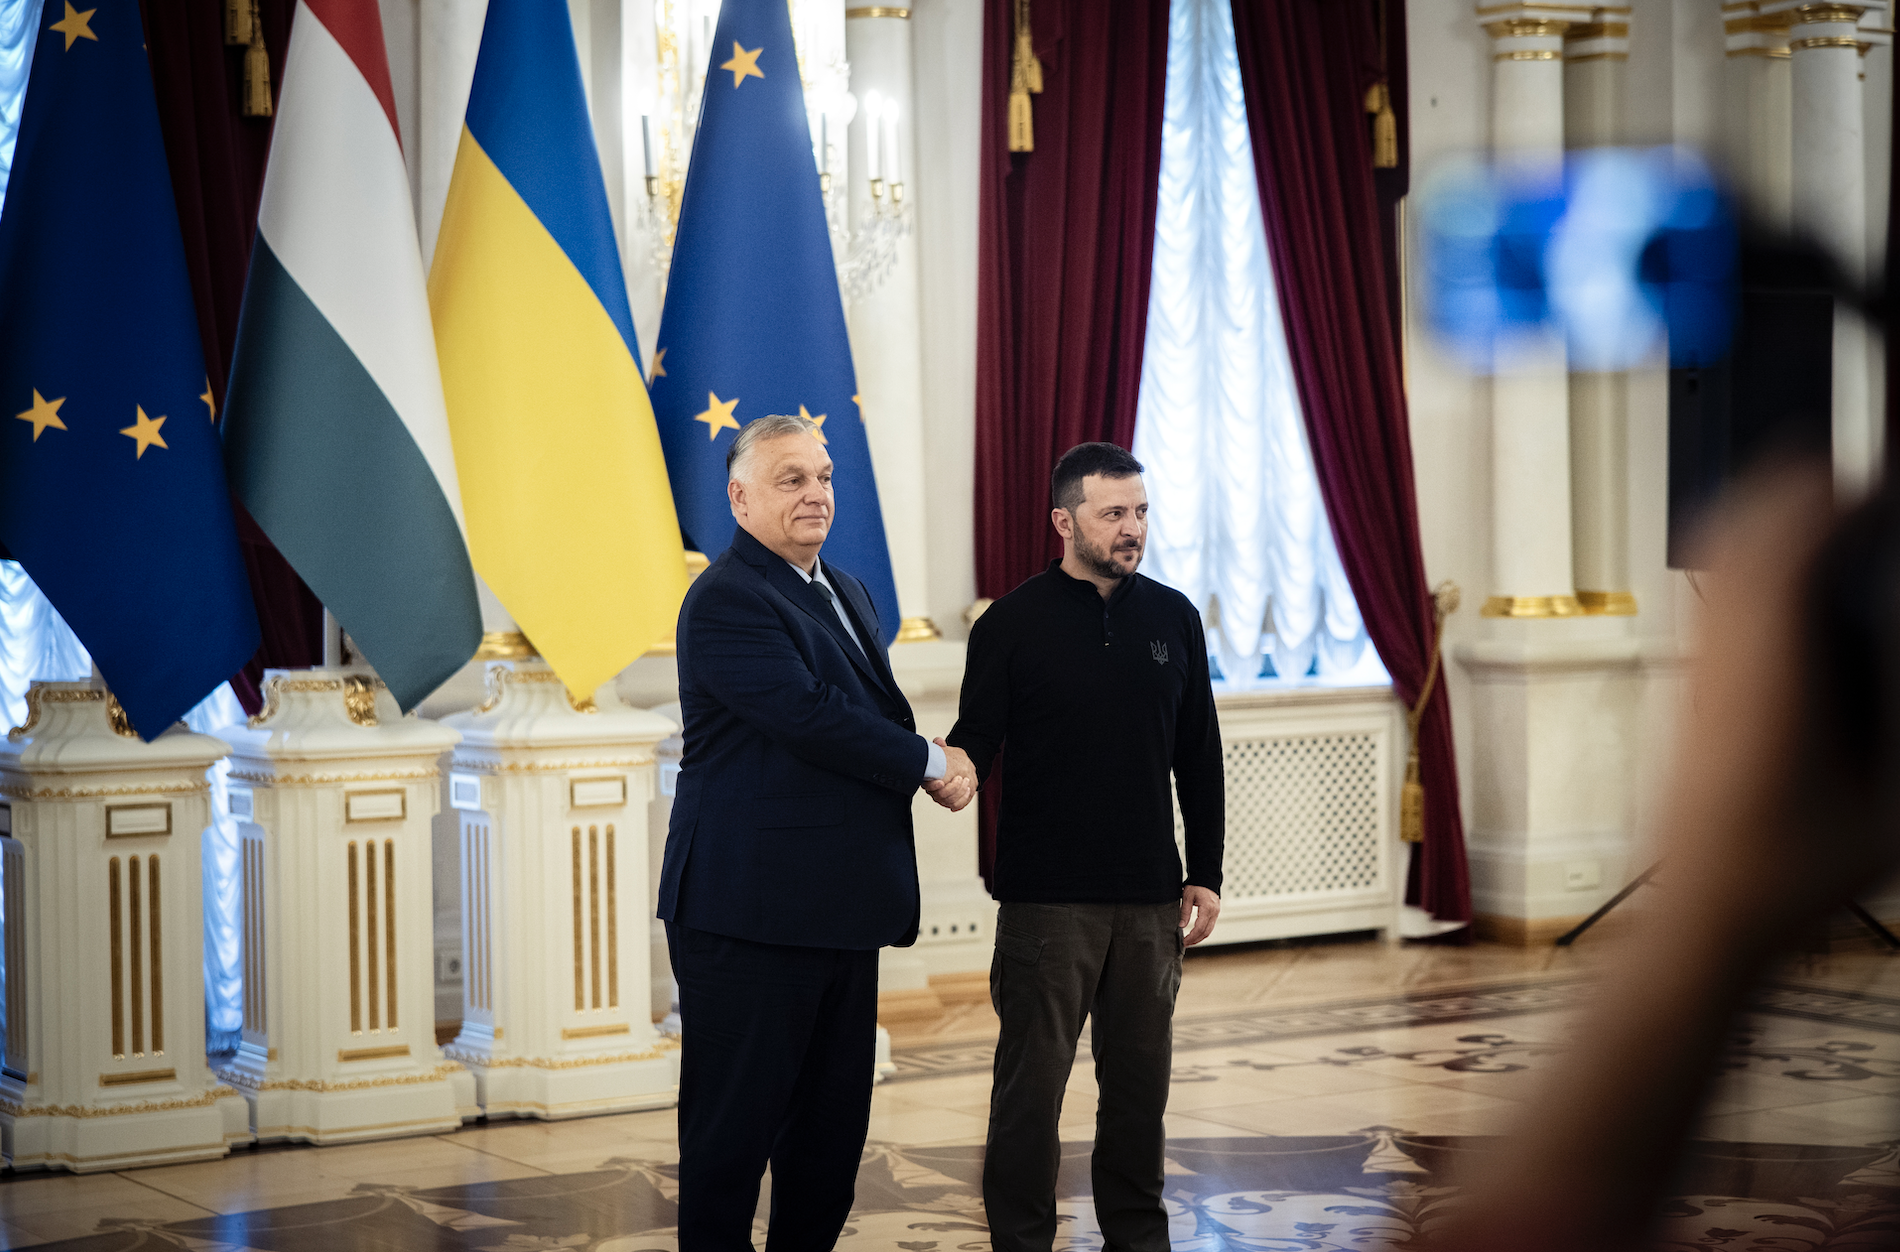 Orbán Travels to Kyiv for Talks